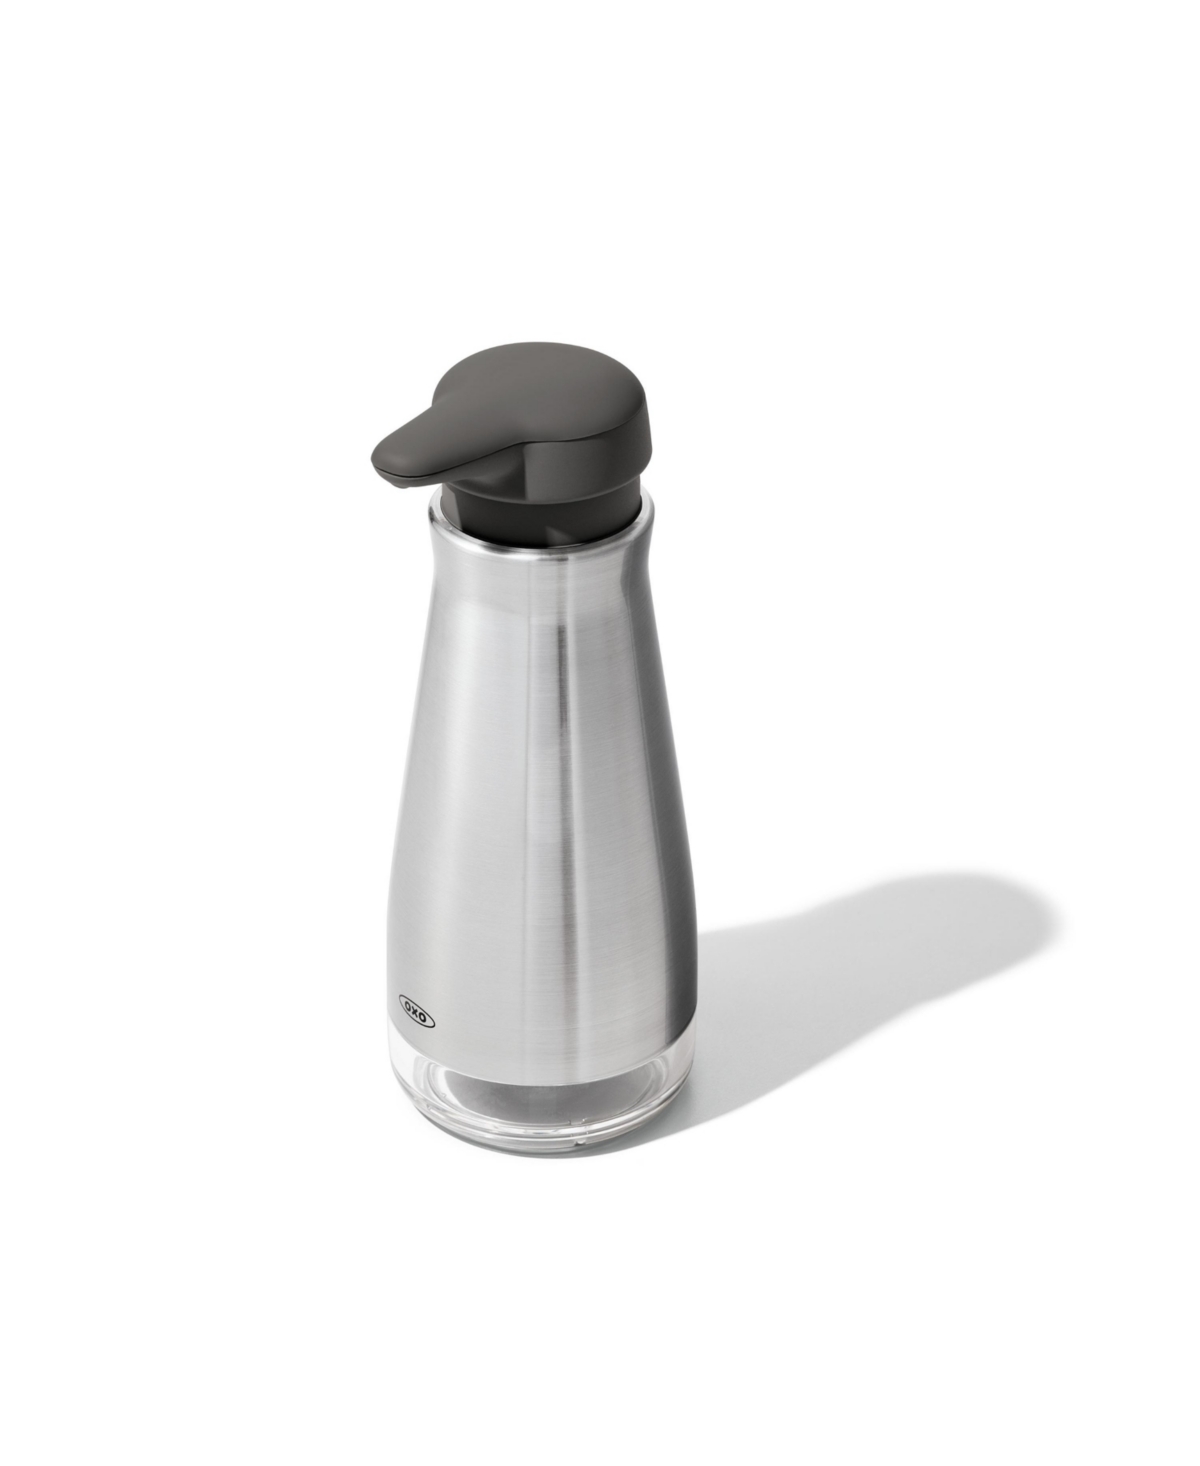 Big Button Soap Dispenser - Stainless steel